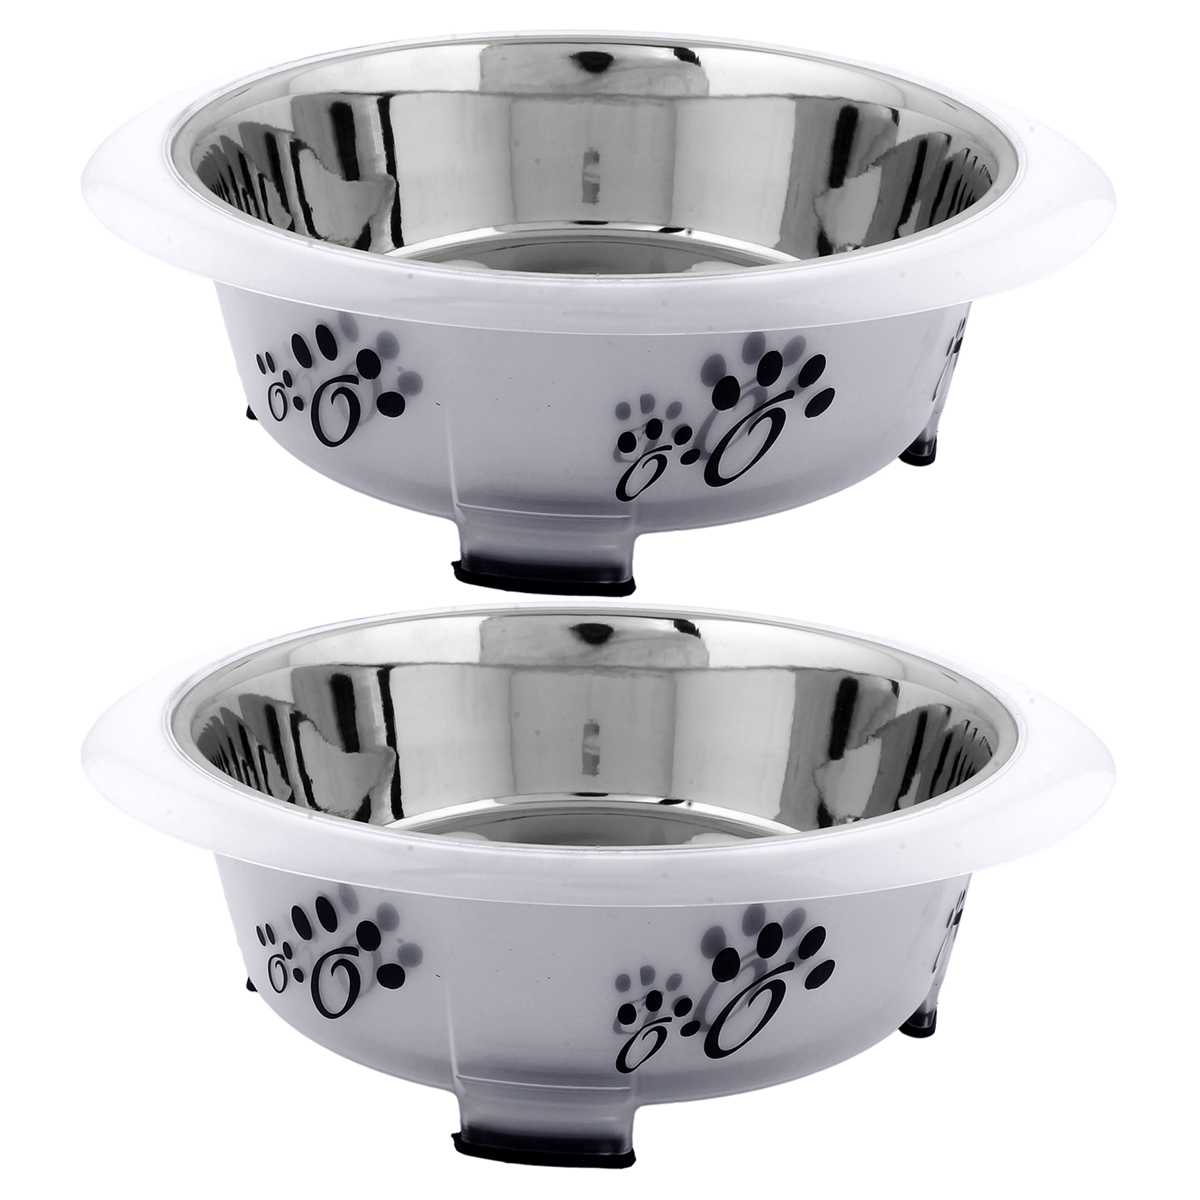 Iconic Pet 51764 15 Oz Color Splash Designer Oval Fusion Bowl For Dog & Cat, Small Gray Set Of 2 - 2 Cups